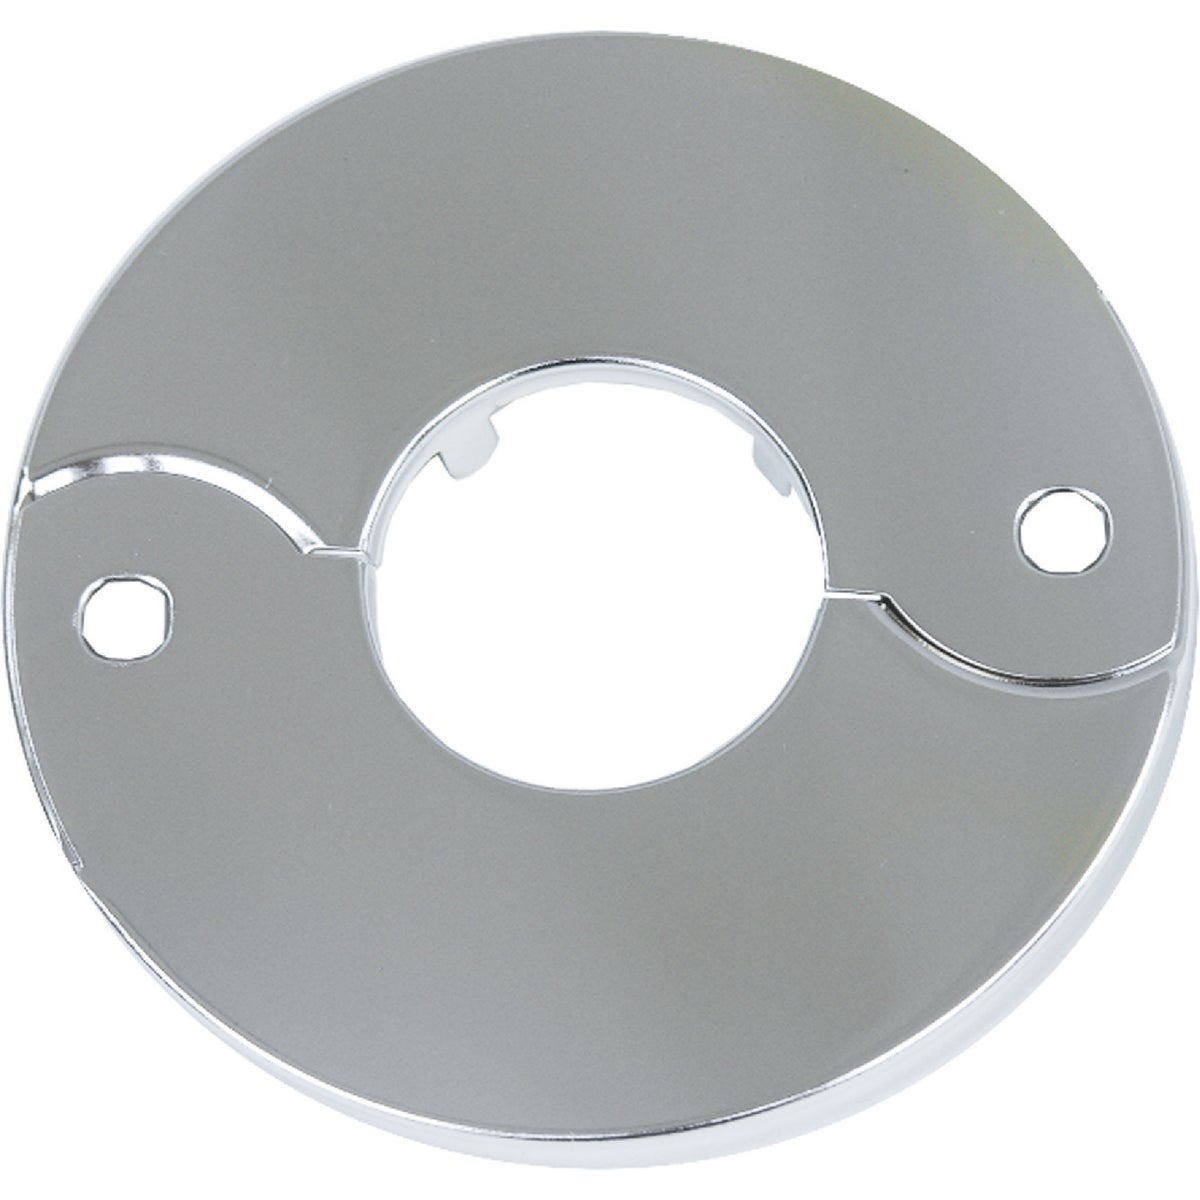 Lasco Chrome-Plated 3/4 In. IP or 1 In. Copper 1 In. ID Split Plate